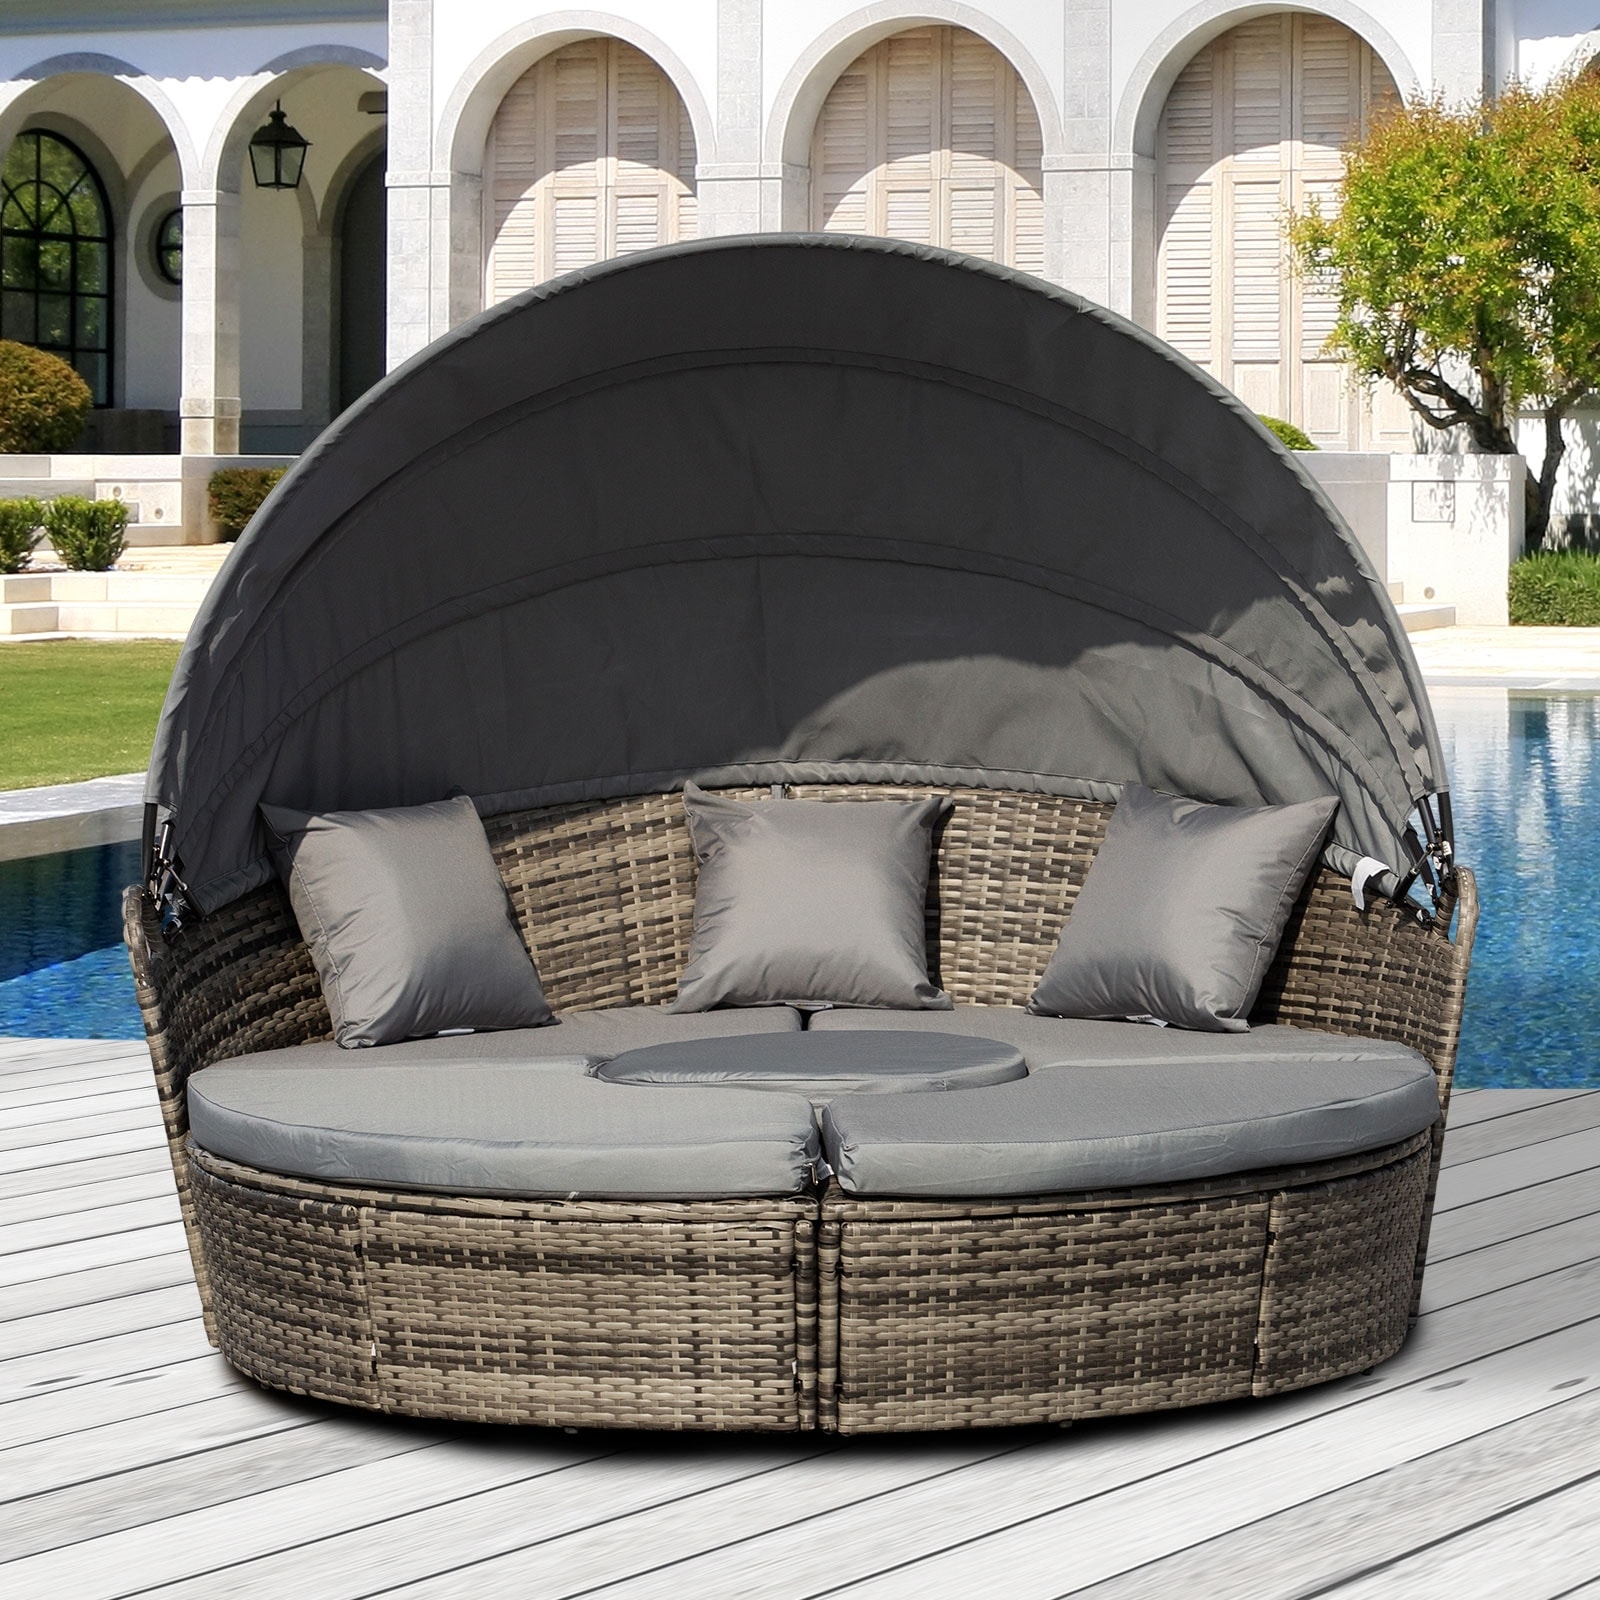 Outsunny 4-piece Cushioned Outdoor Rattan Wicker Round Sunbed Or Conversational Sofa Set With Sun Canopy